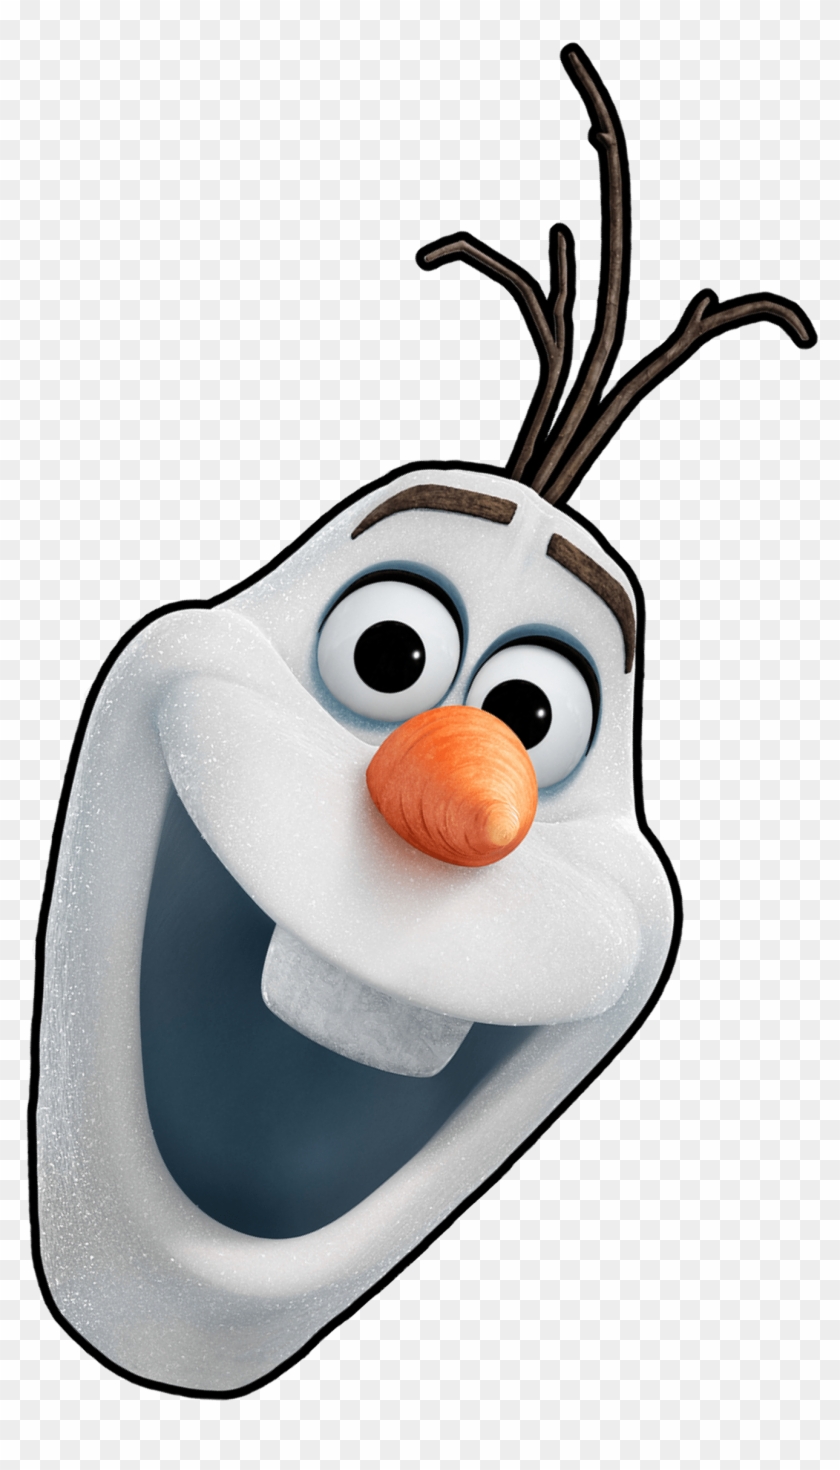 Free Olaf Printable Do You Want To Build A Snowman Pin On Basteln 